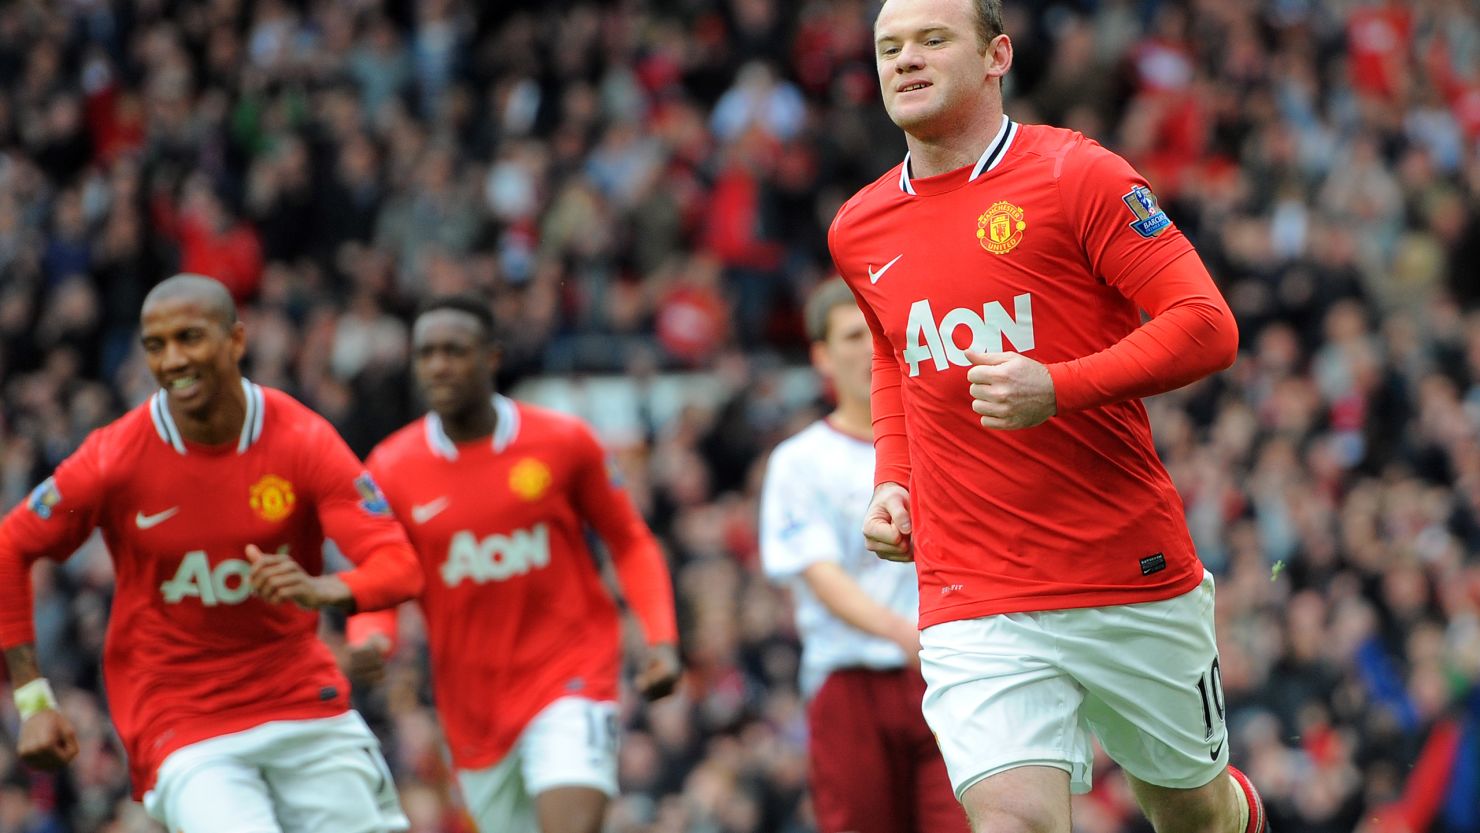 Wayne Rooney celebrates his opening goal from the penalty spot at Old Trafford.